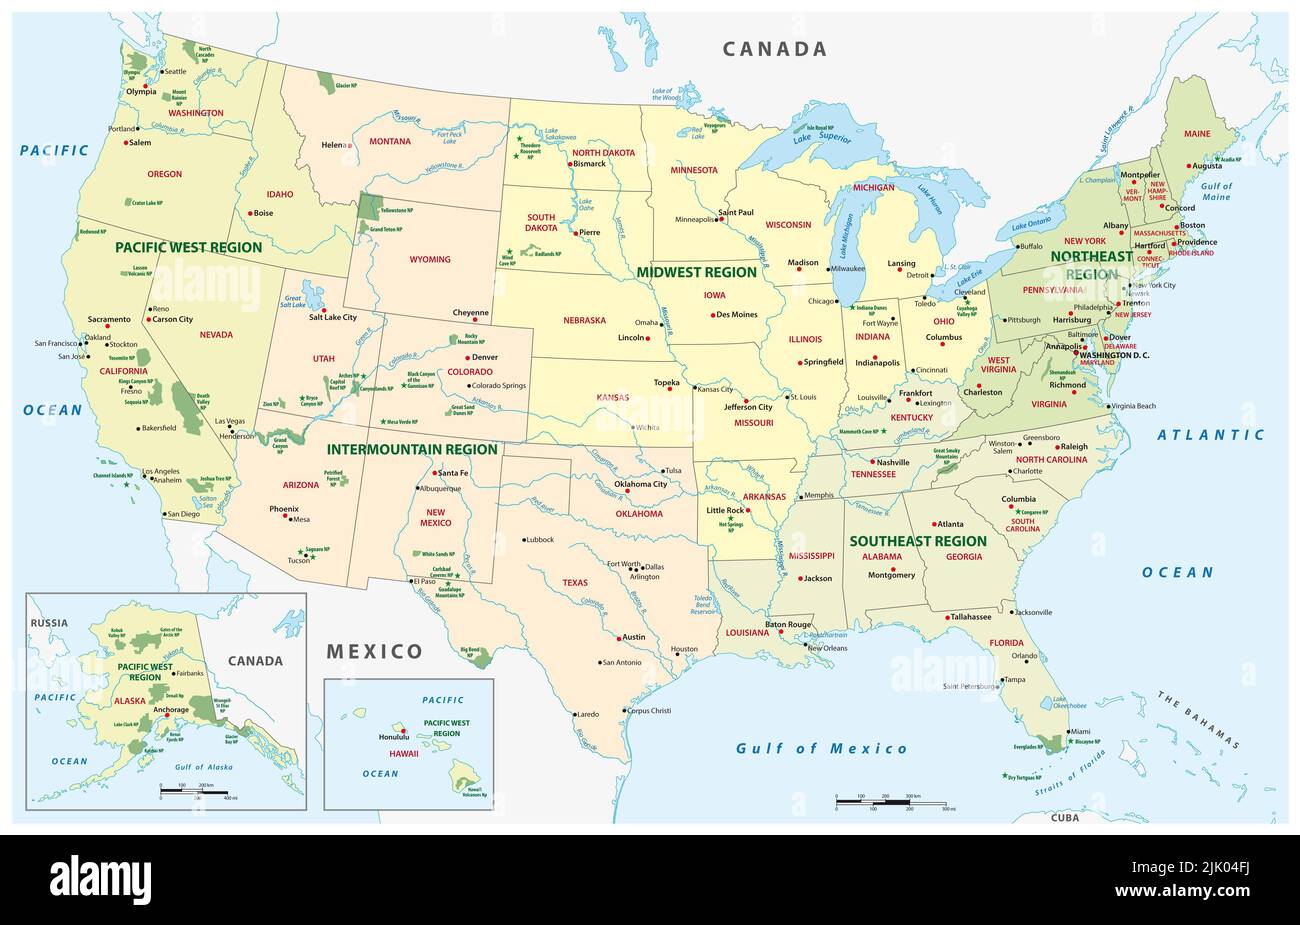 Vector map of national parks, United States Stock Photo